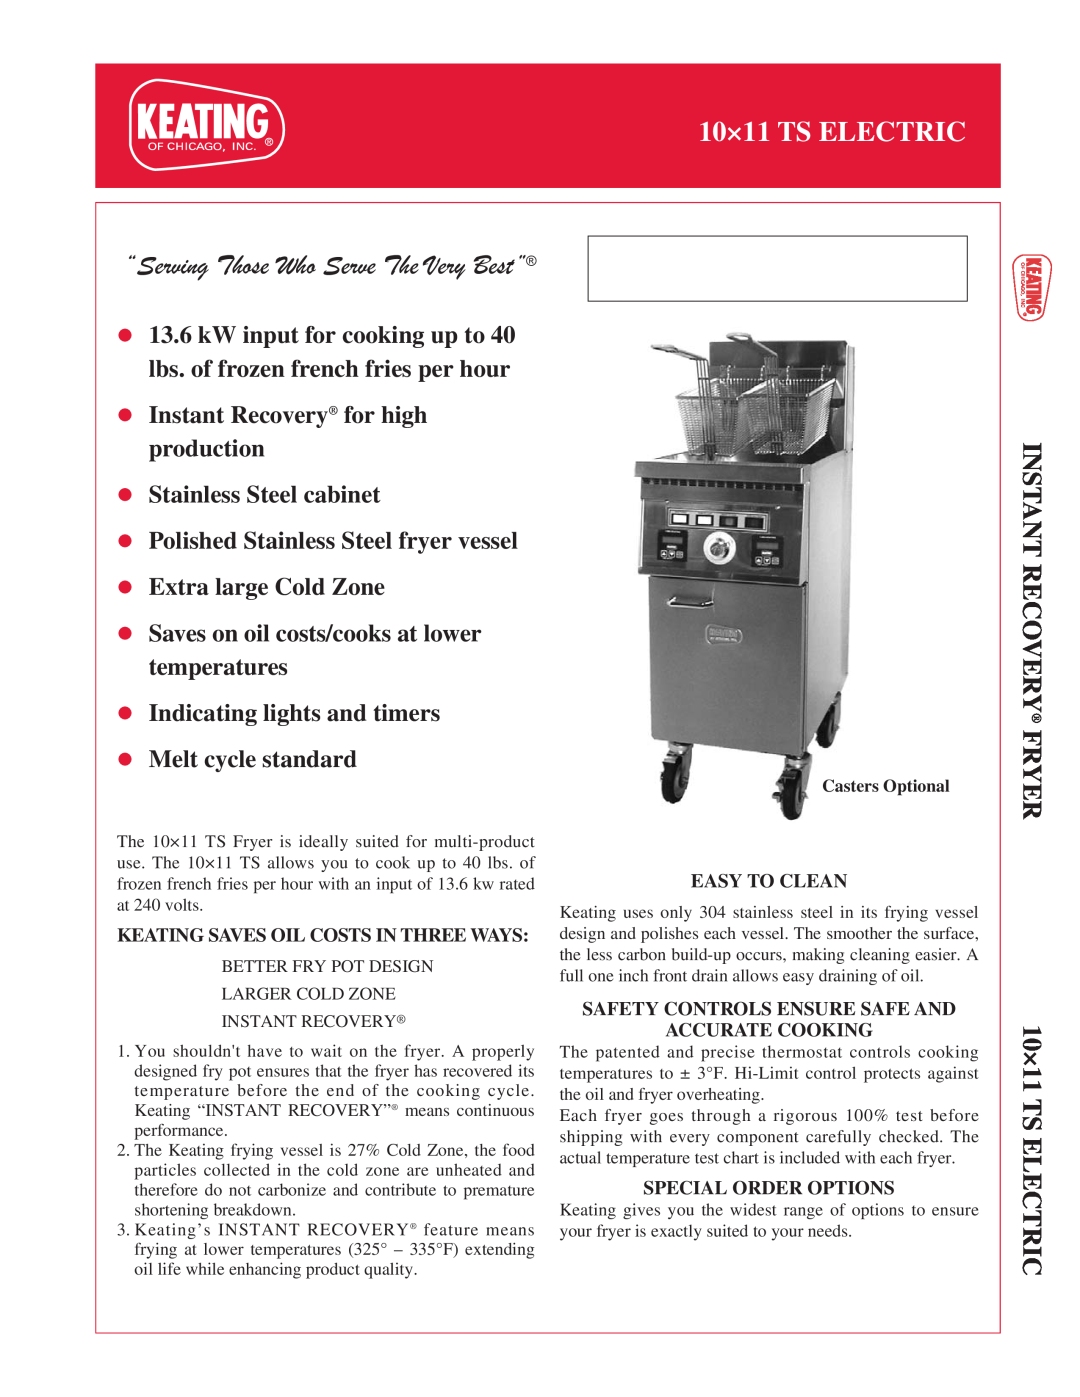 Keating Of Chicago 10x11 TS manual 10×11 TS ELECTRIC, Instant Recovery Fryer, Casters Optional, Stainless Steel cabinet 